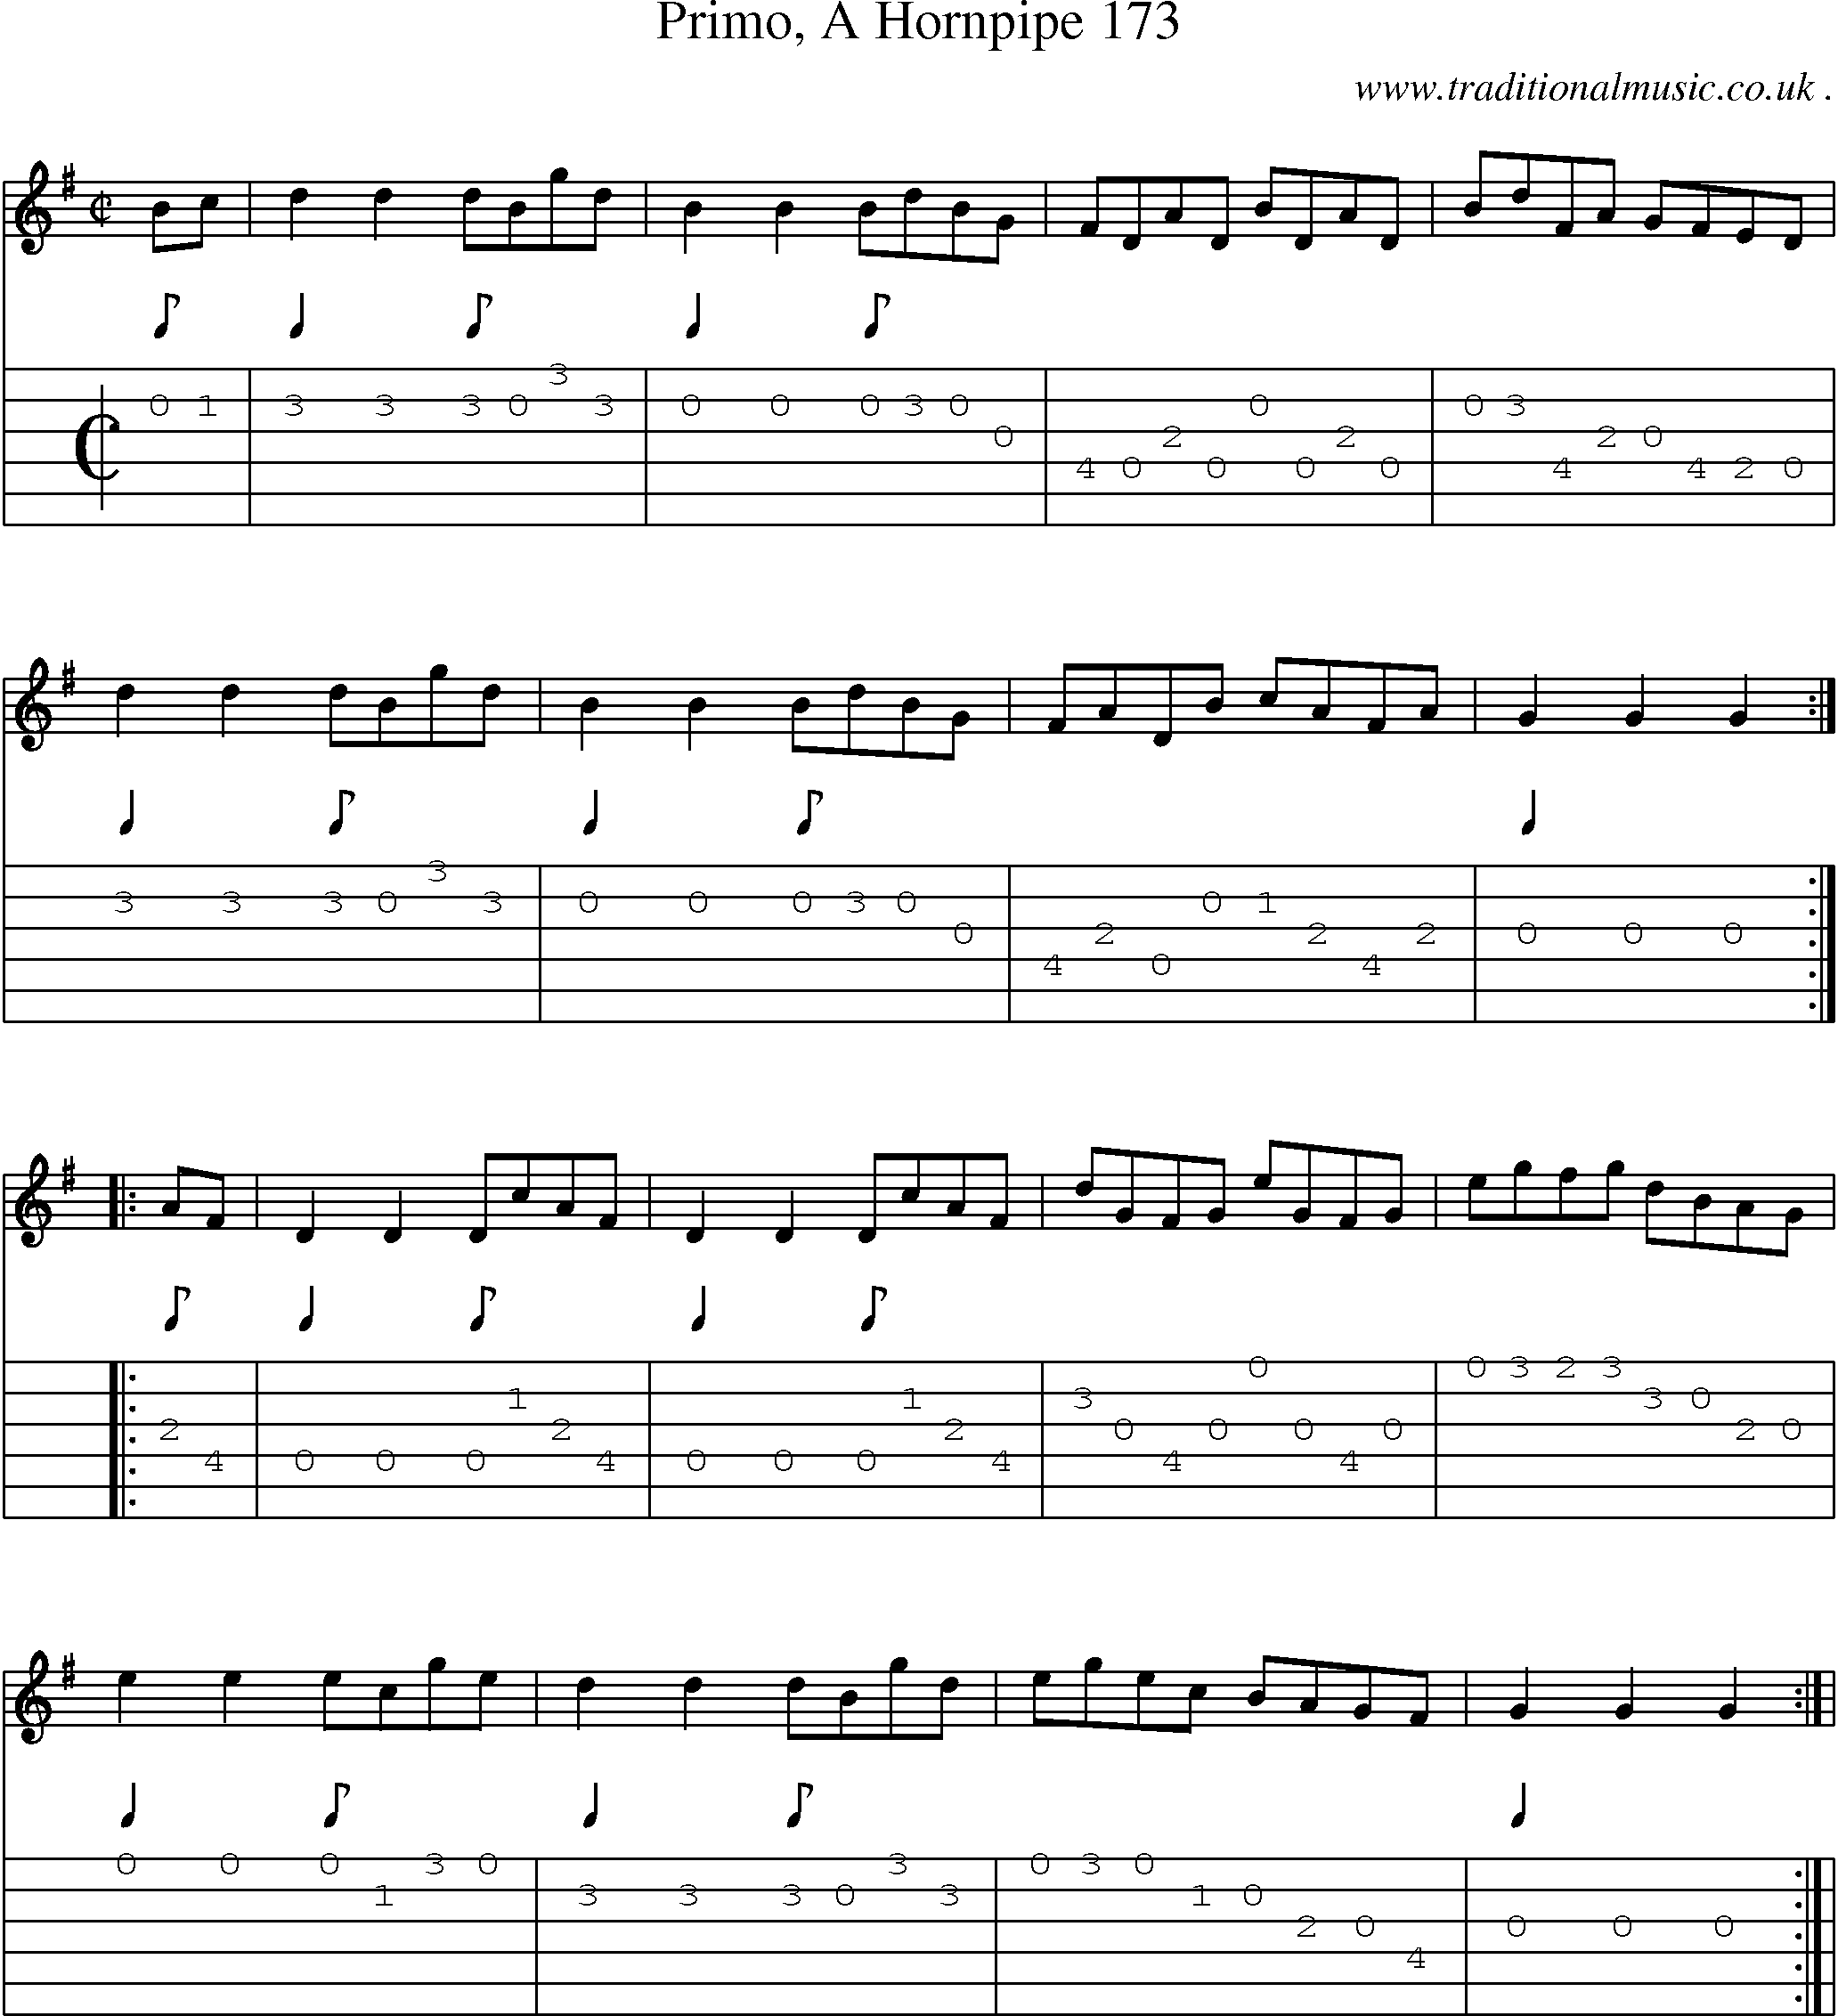 Sheet-Music and Guitar Tabs for Primo A Hornpipe 173